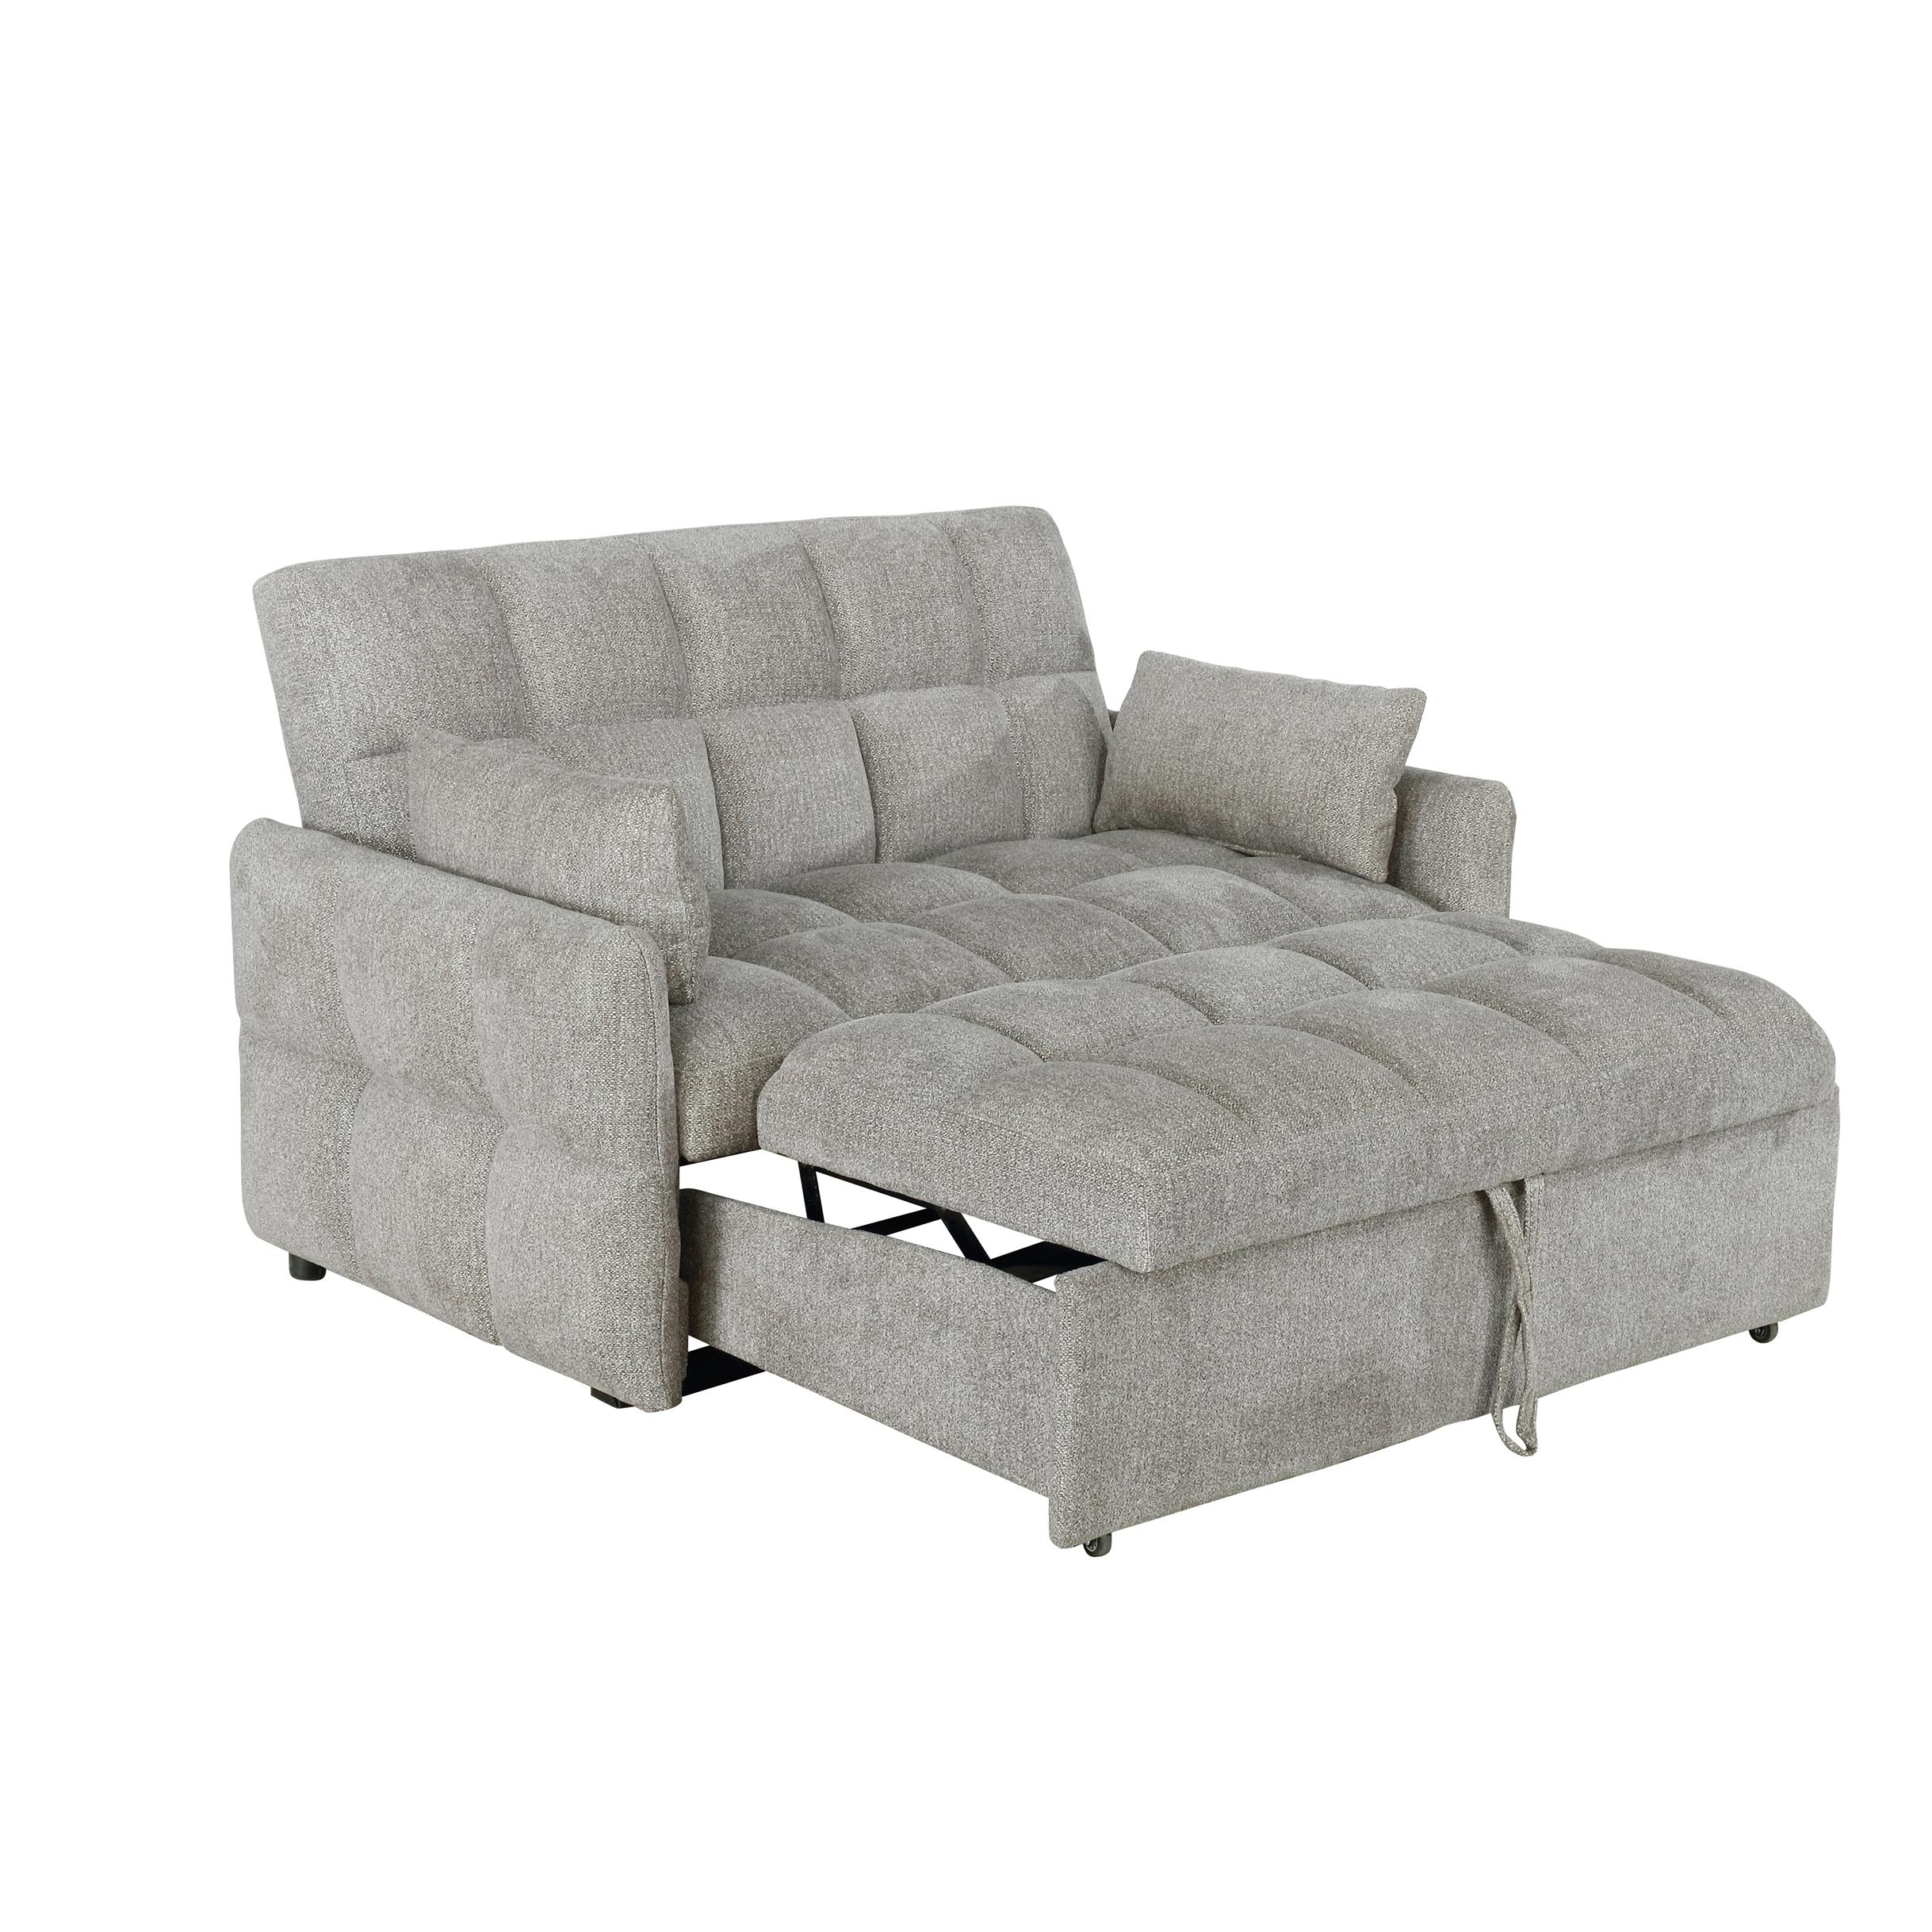 Coaster 508307 Cotswold Sleeper Sofa Bed